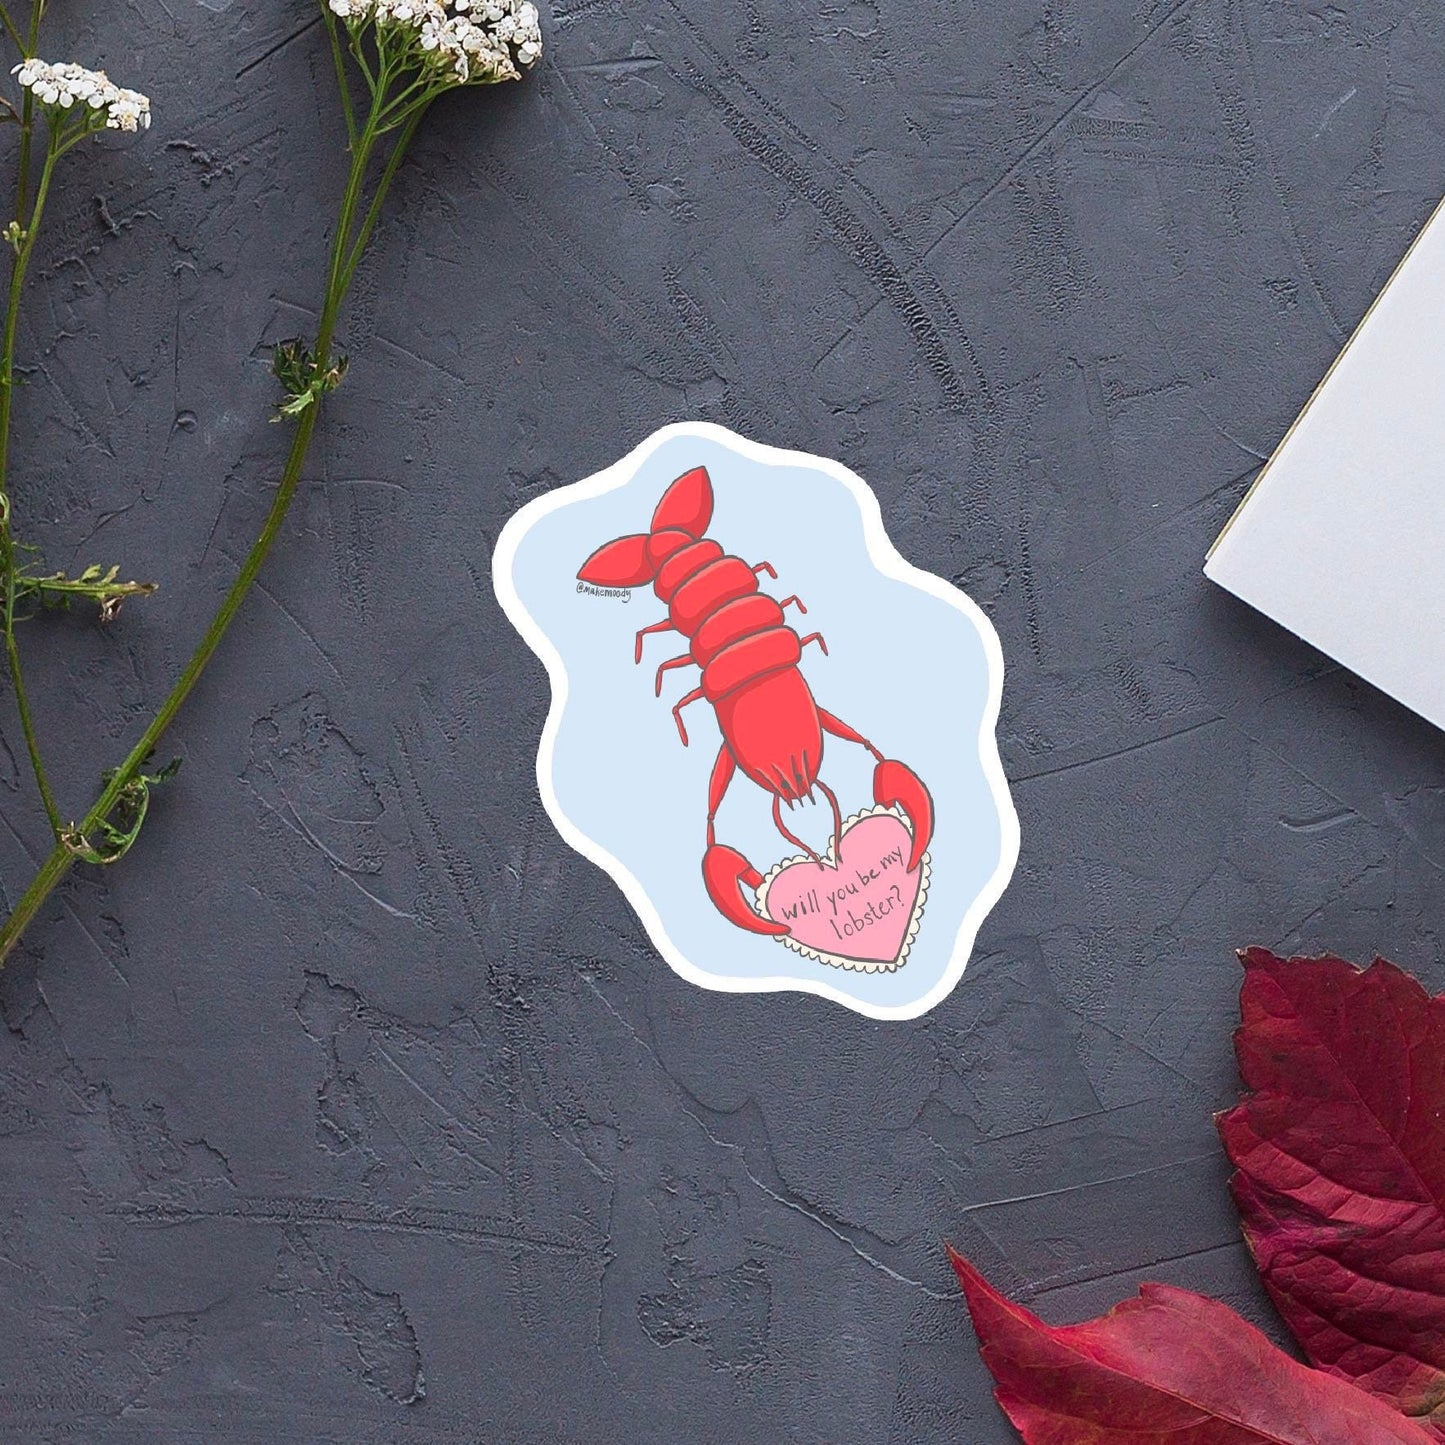 Will You Be My Lobster? - Die-Cut Vinyl Decal Sticker - Friends Quote, Friends Show, Ross and Rachel, Engagement, Marry Me, Prom, Valentine